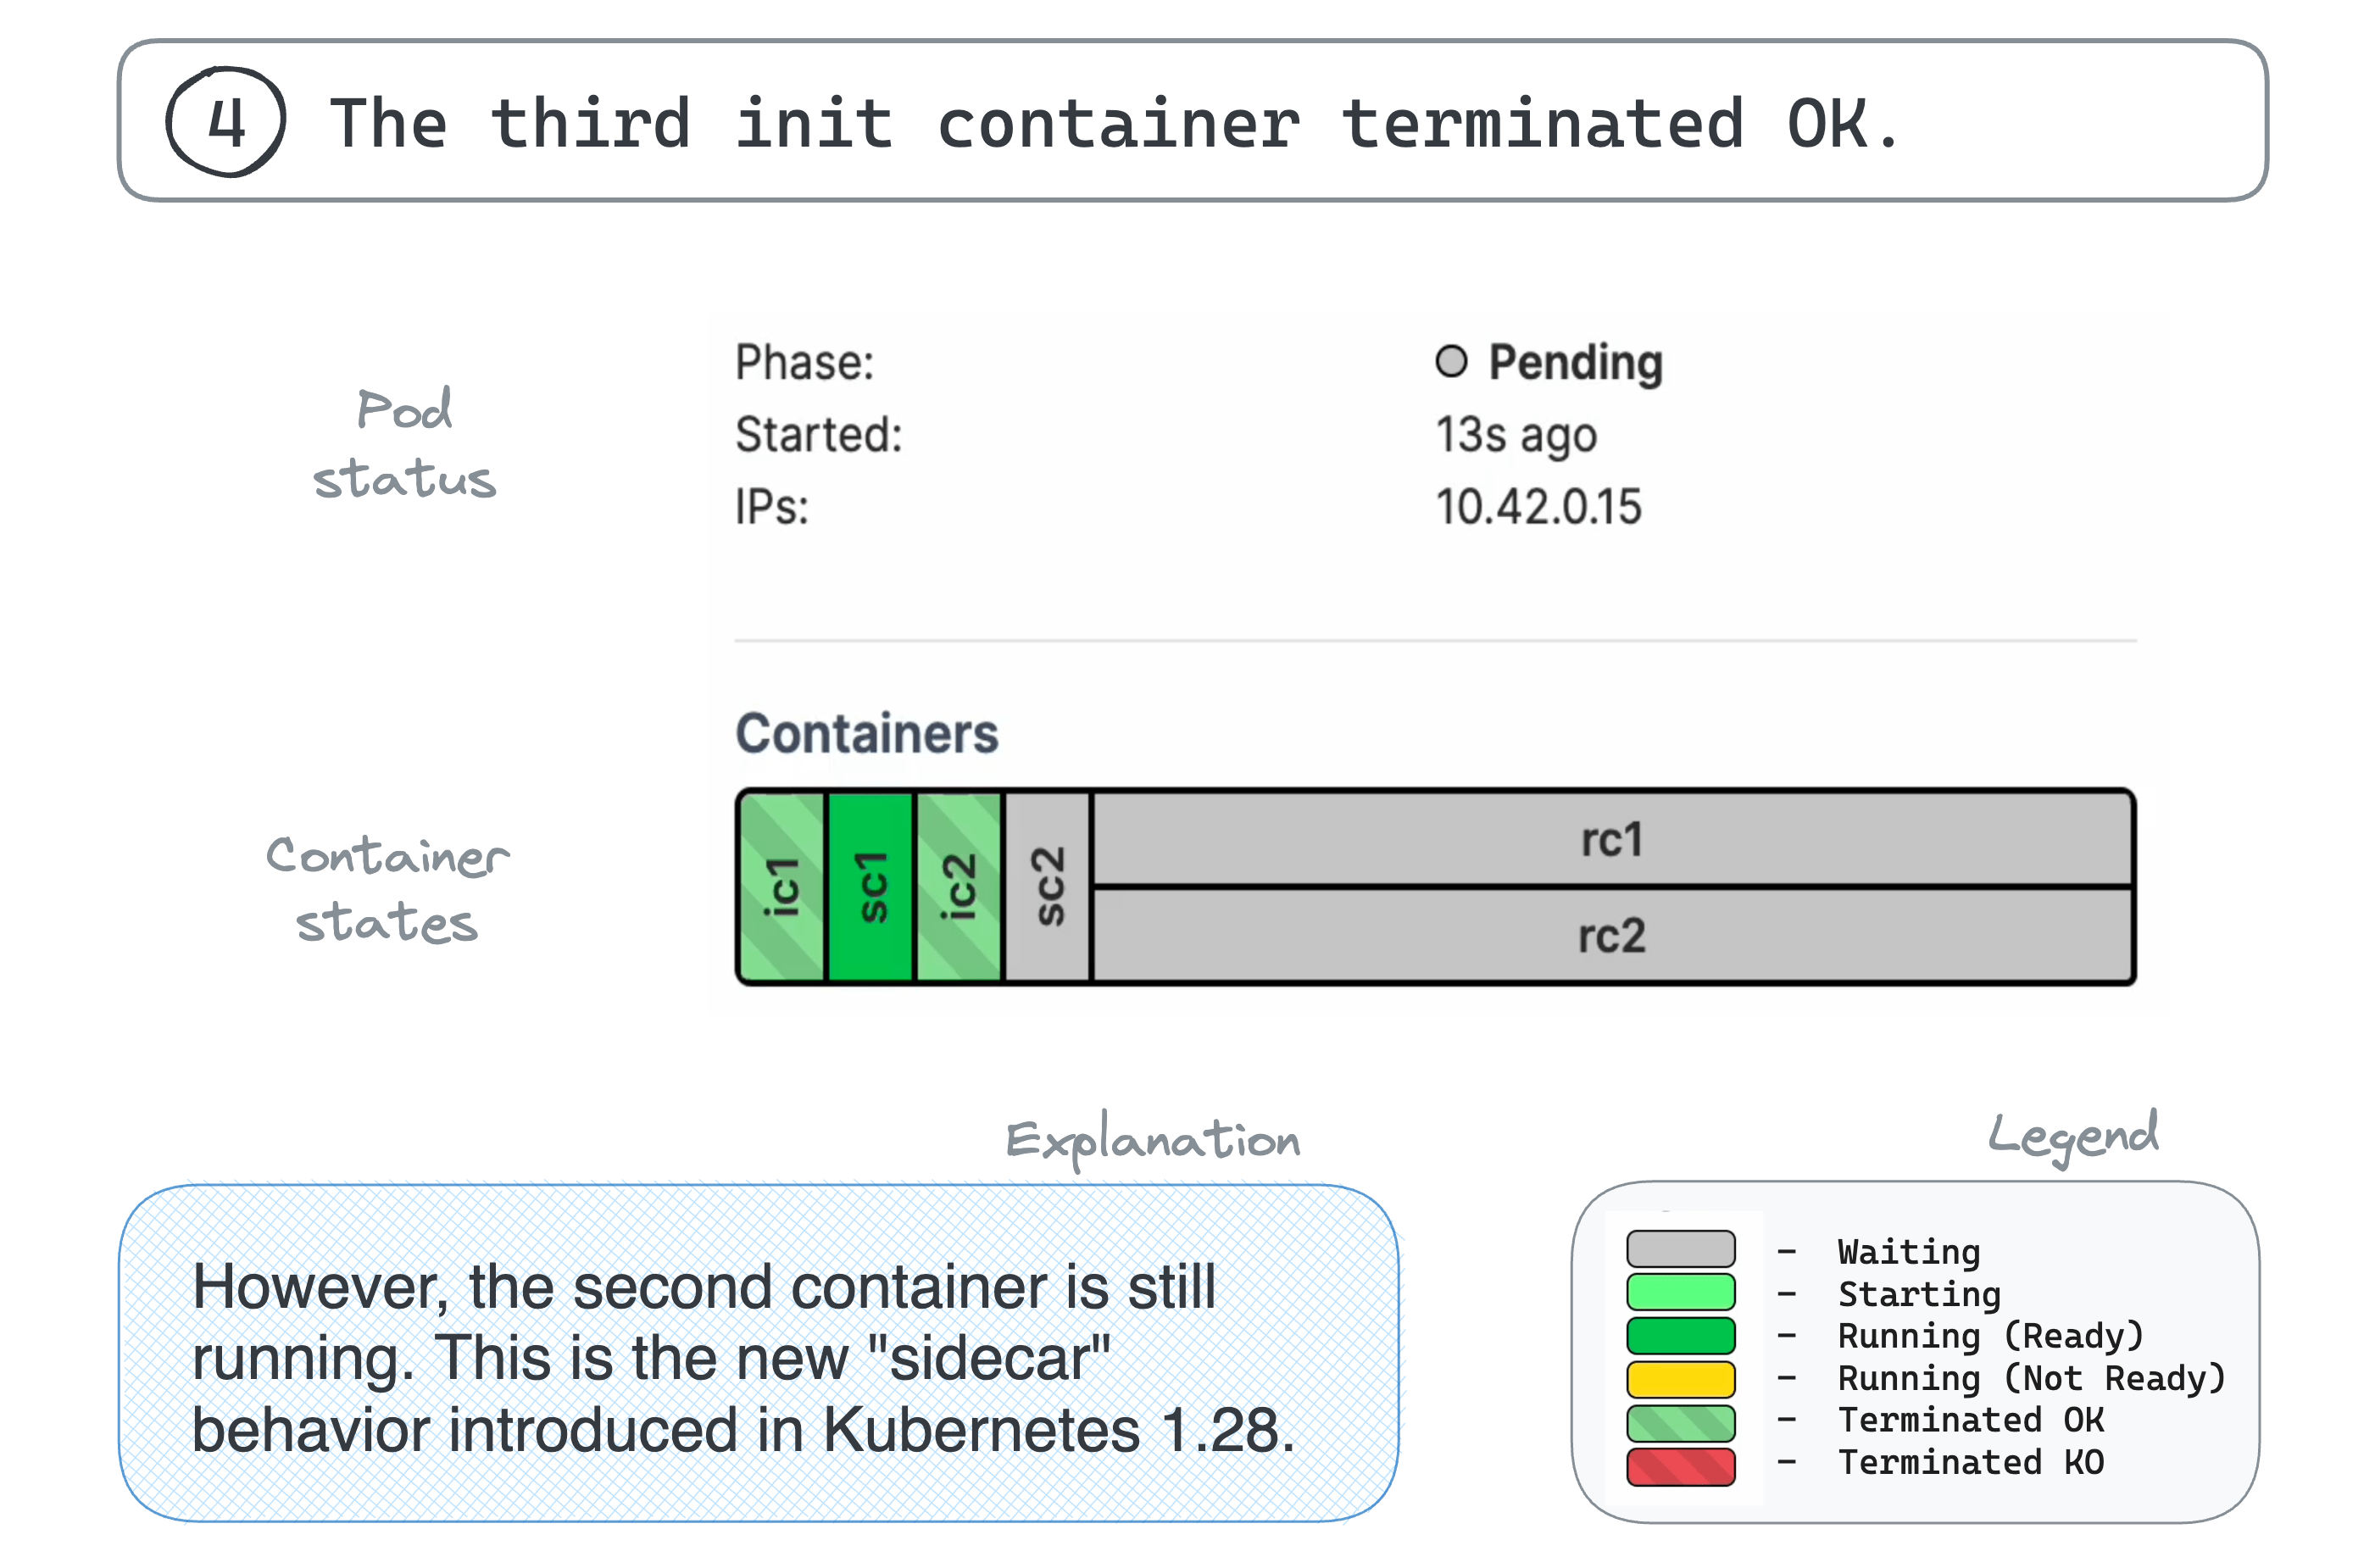 4. The third init container terminated OK.